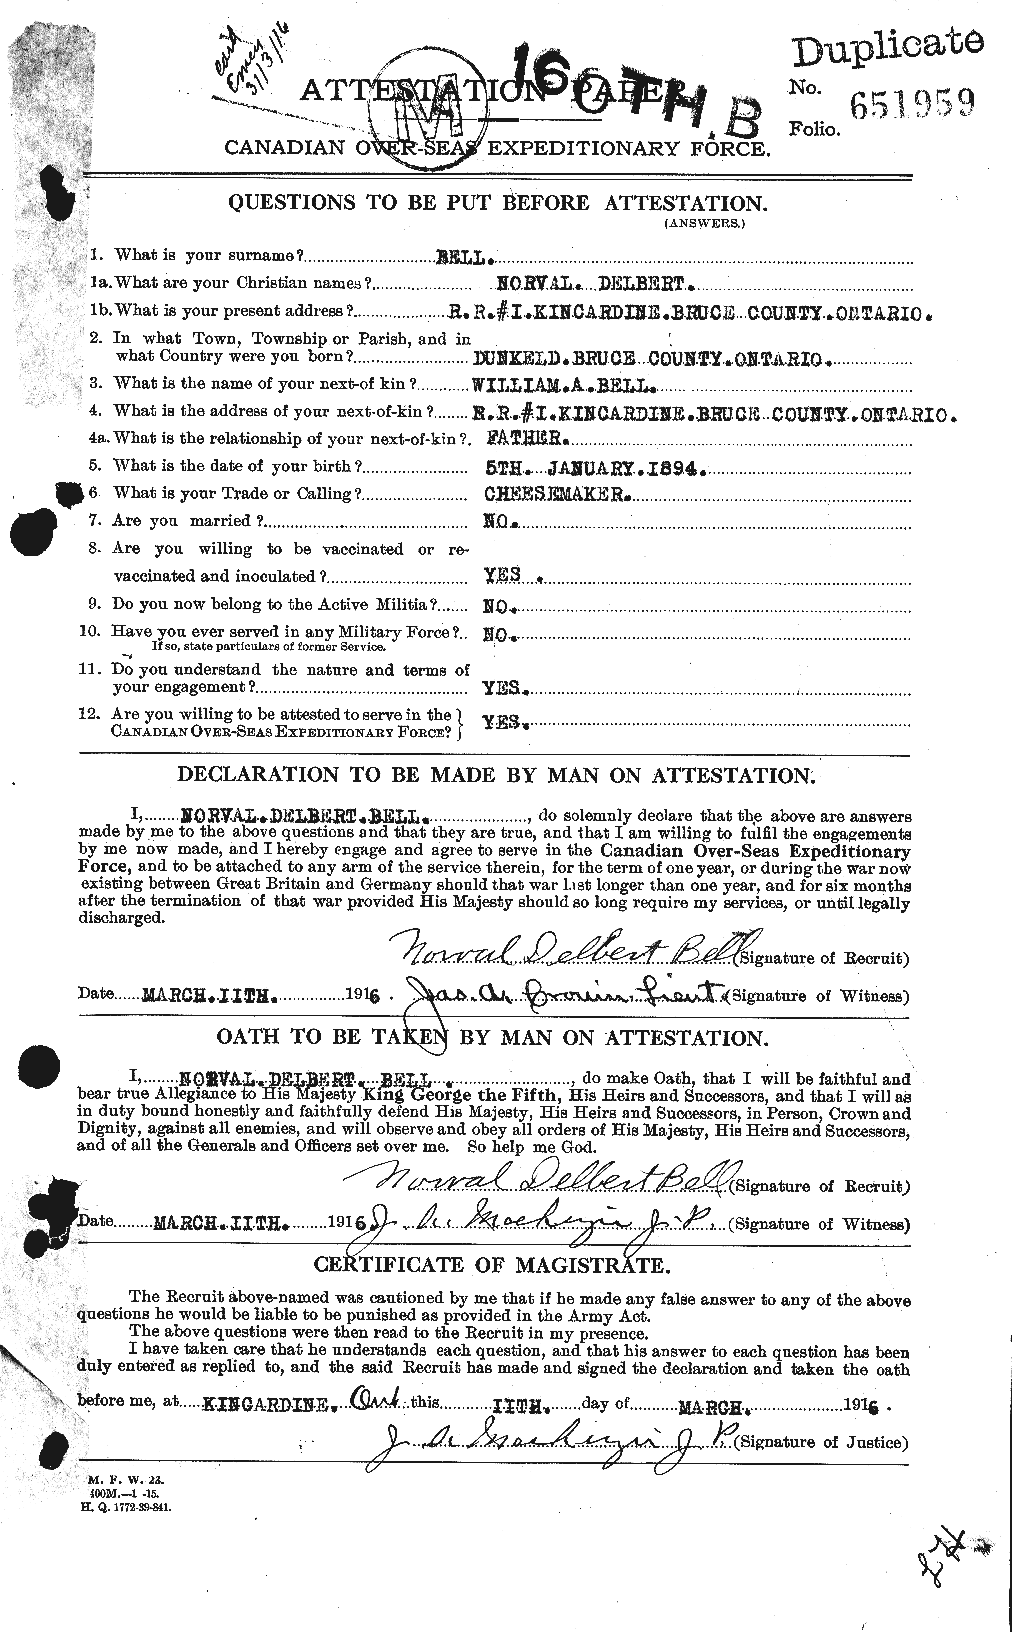 Personnel Records of the First World War - CEF 234576a